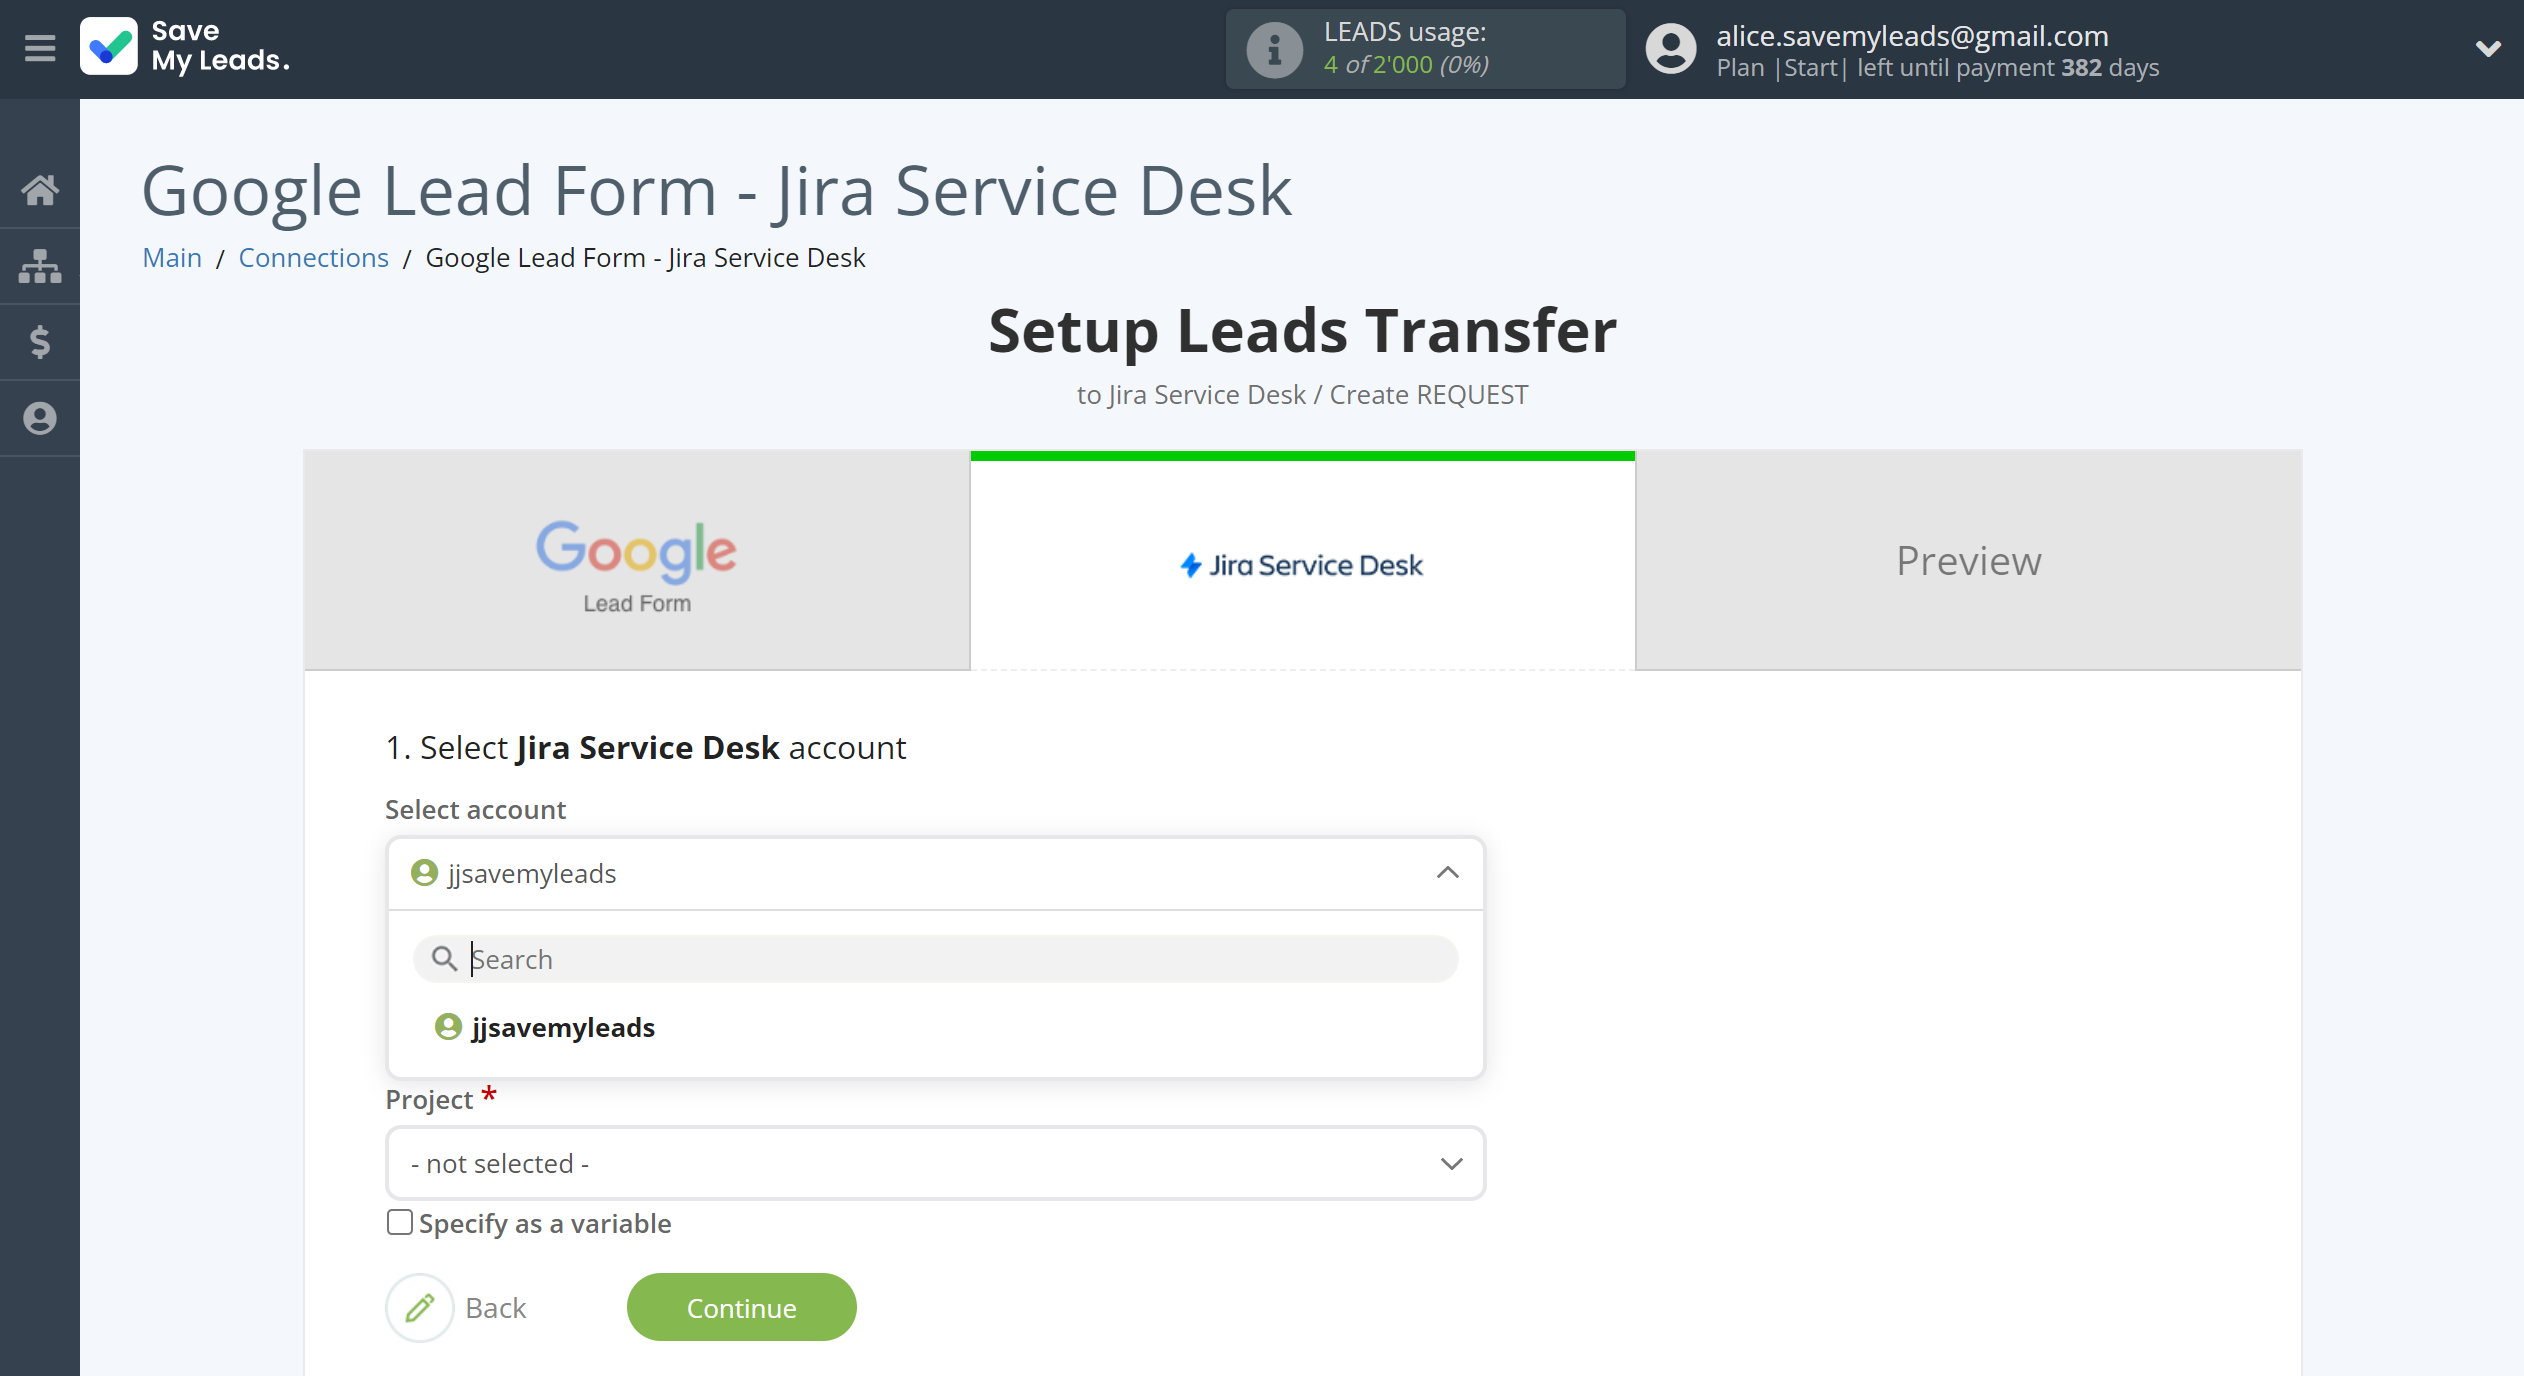 How to Connect Google Lead Form with Jira Service Desk | Data Destination account selection